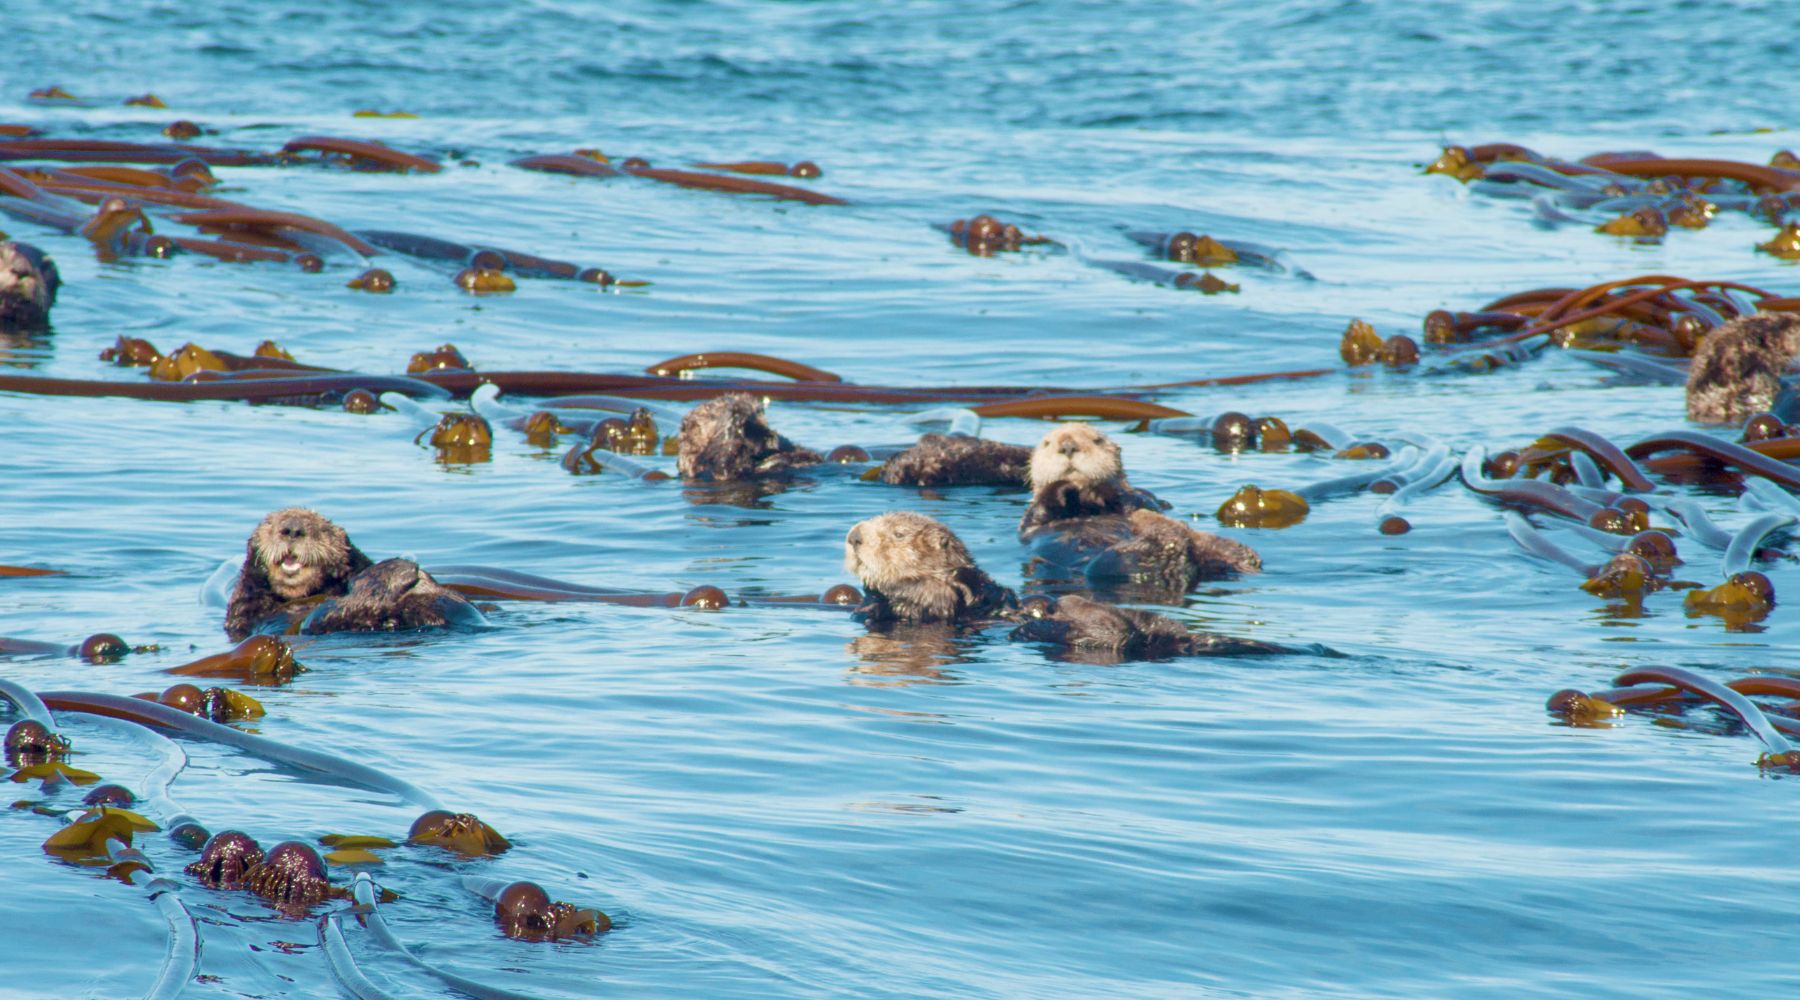 Sea otters surrounded by kelp